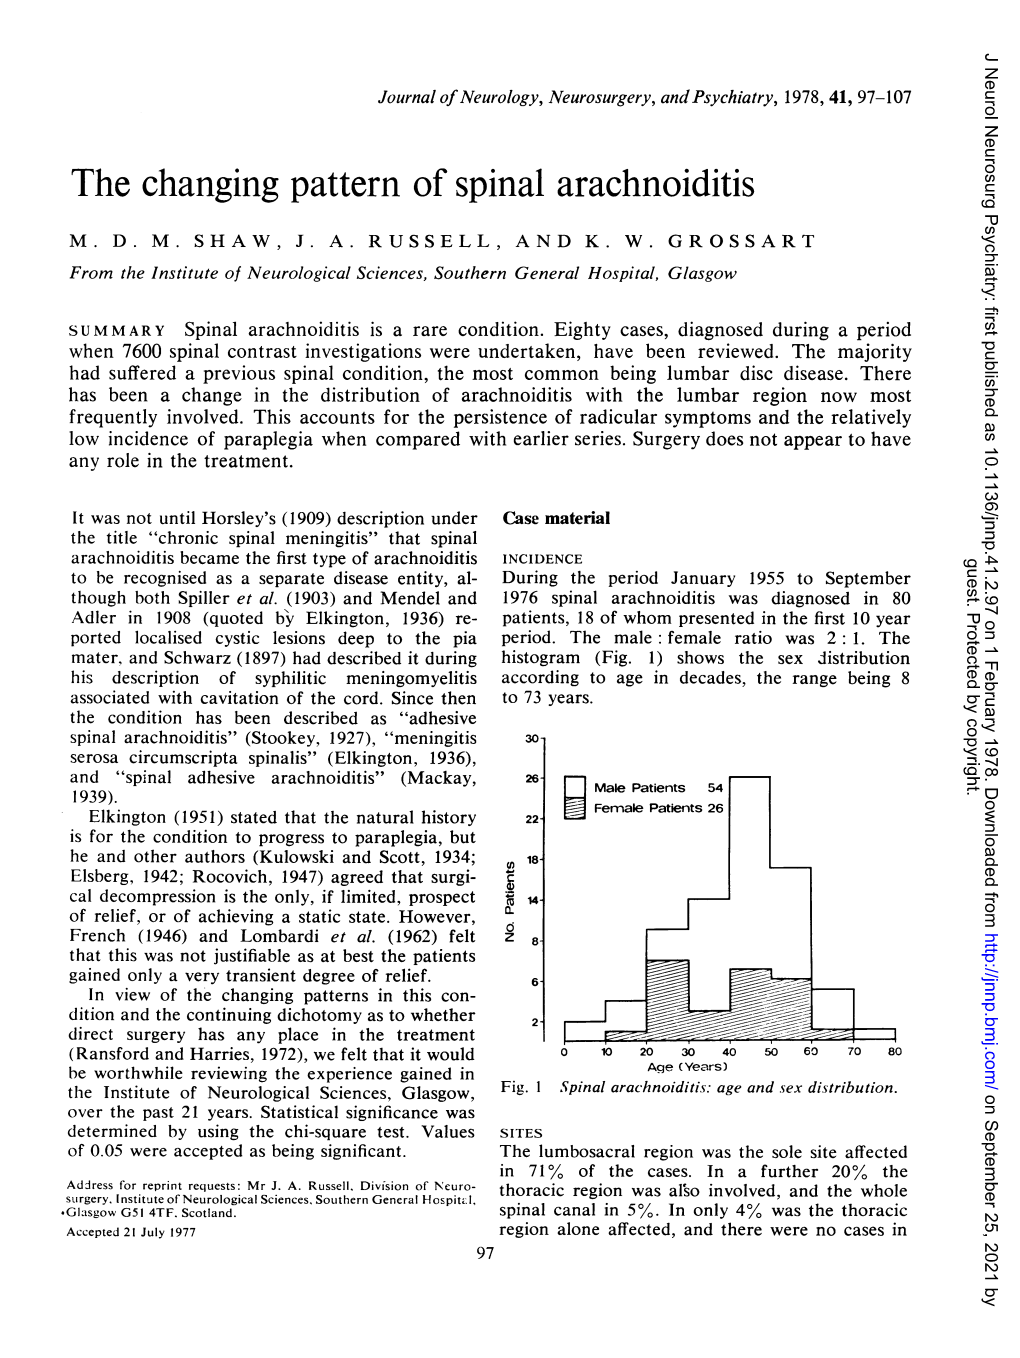 The Changing Pattern of Spinal Arachnoiditis